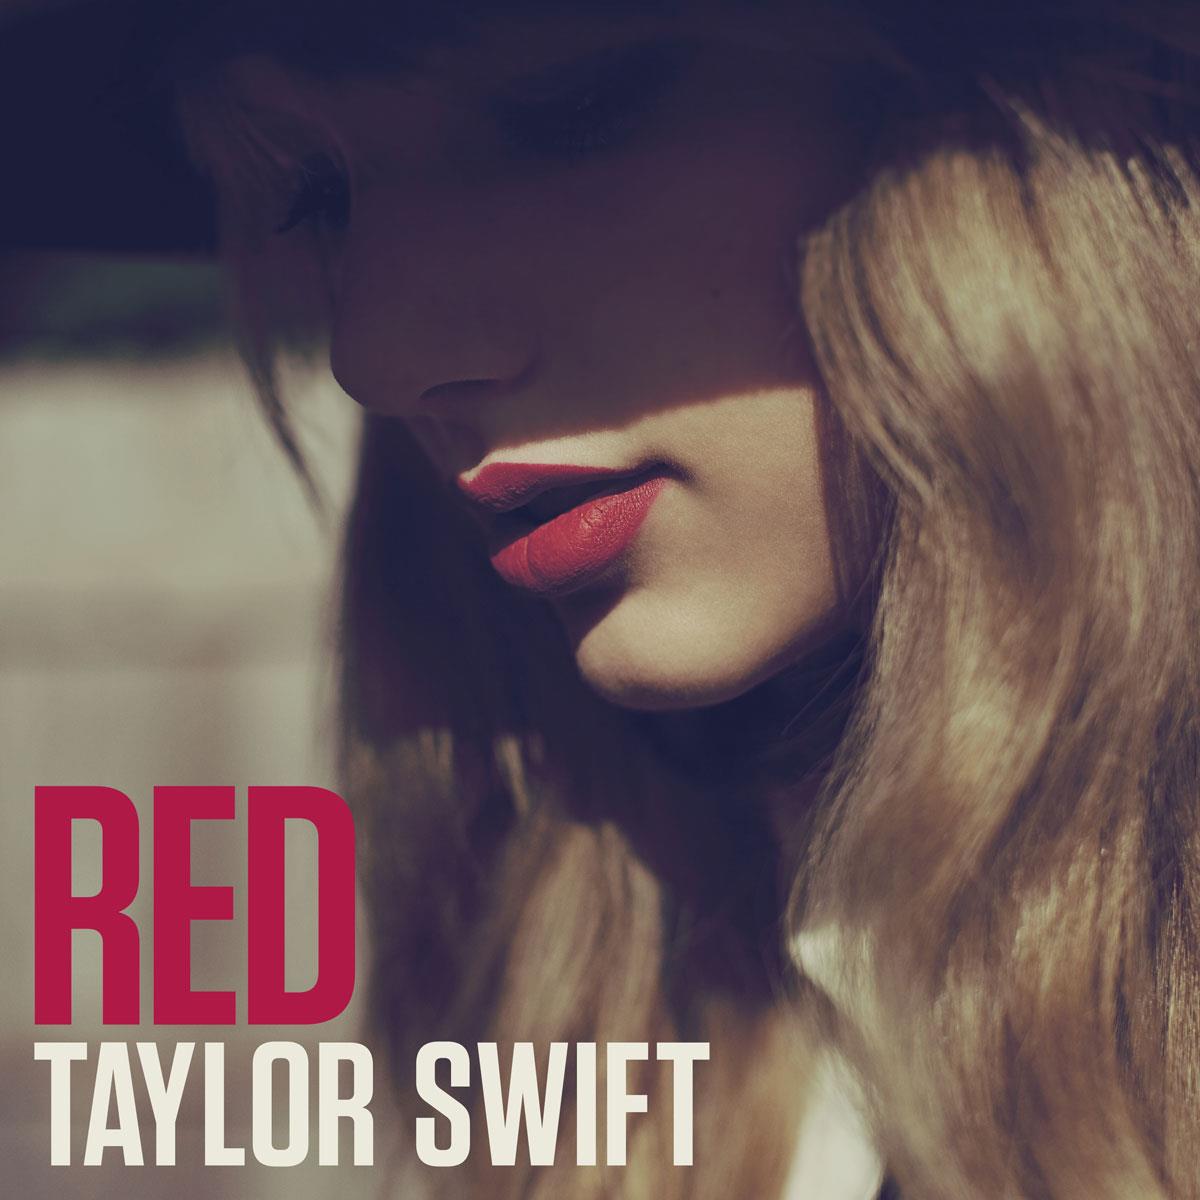 Taylor Swift Announces New Album, RED, Set For Release October 22 | Country Music Rocks